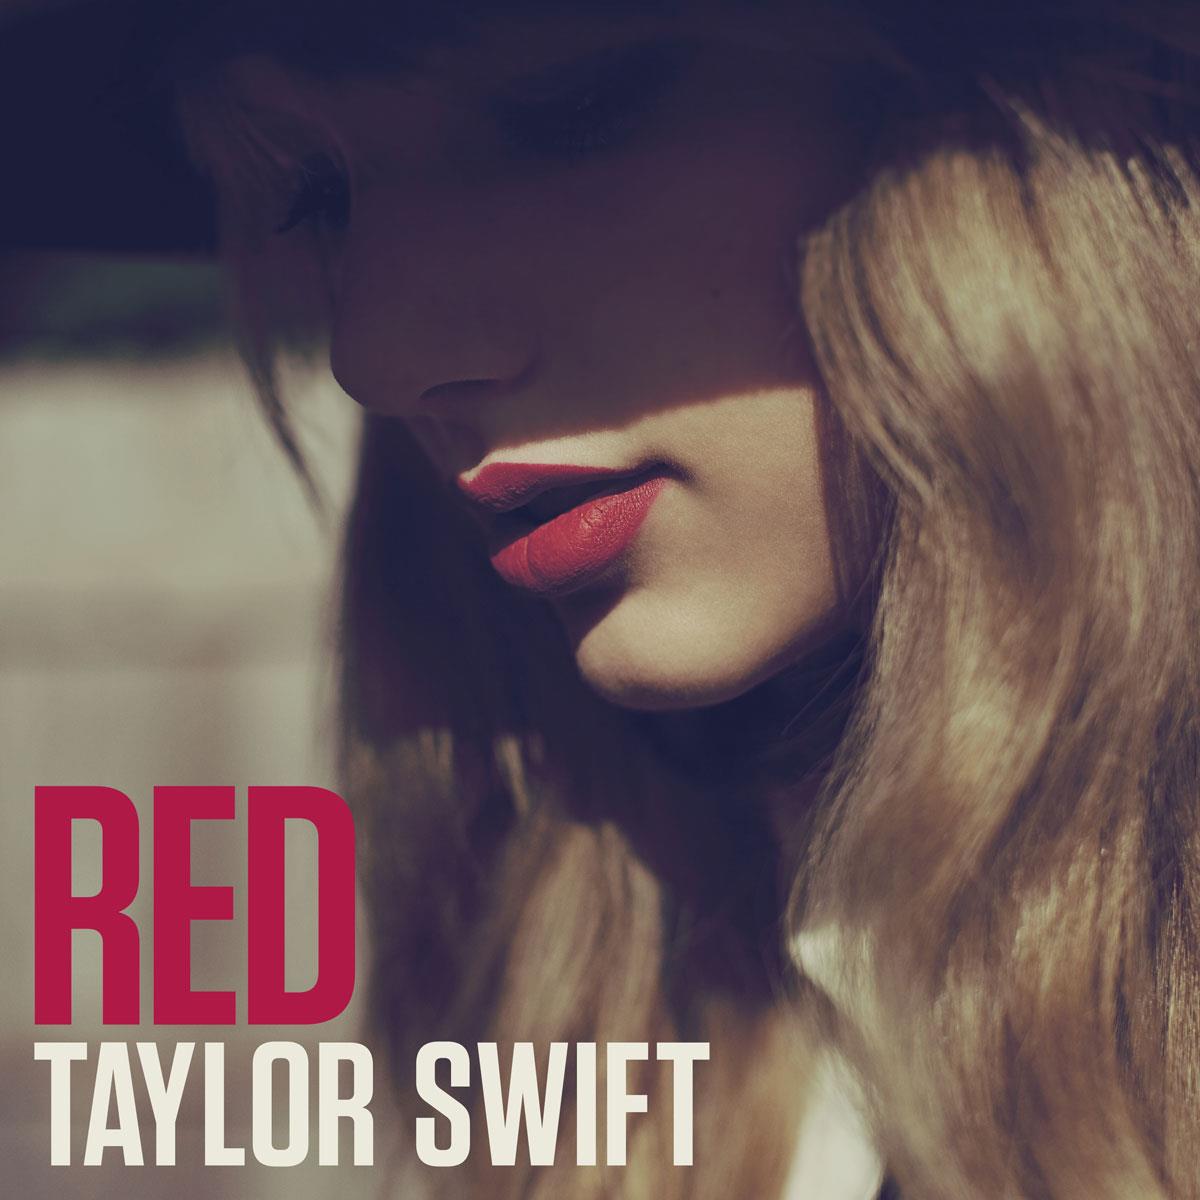 Taylor Swift Announces New Album, RED, Set For Release October 22 | Country Music Rocks